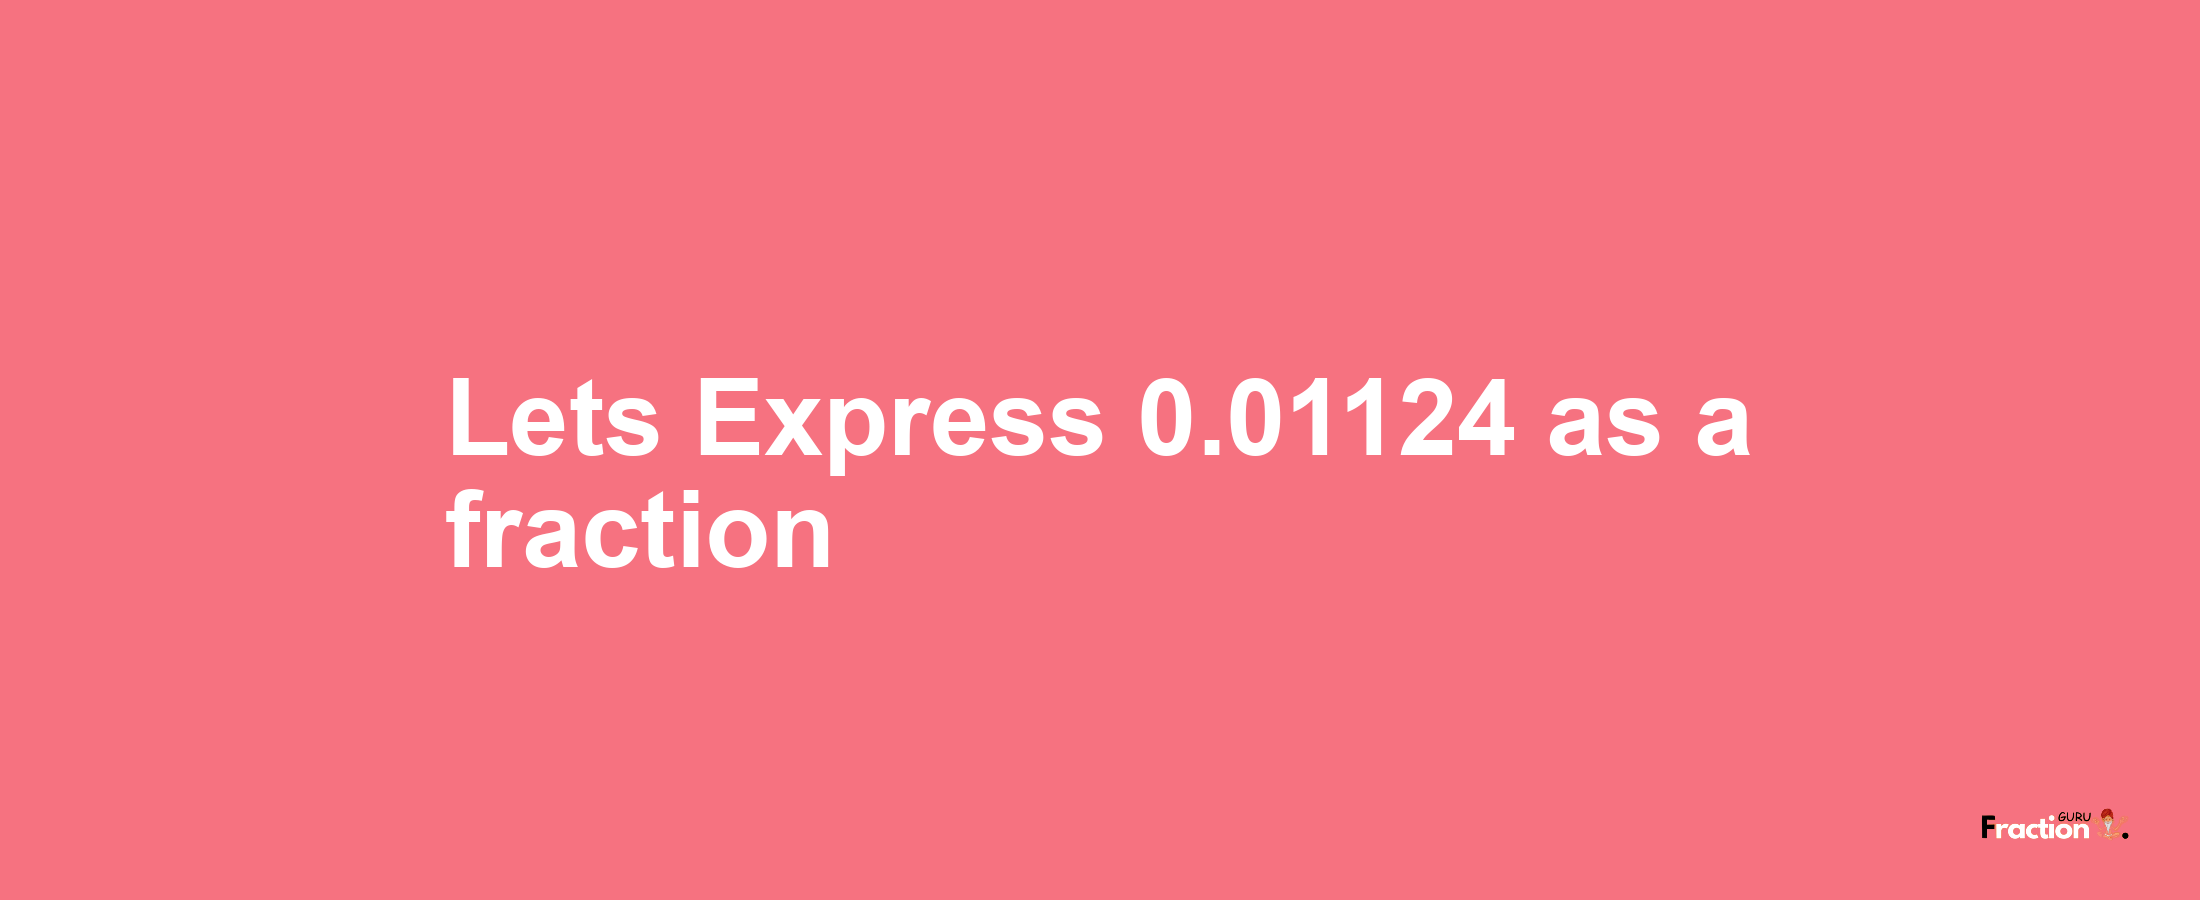 Lets Express 0.01124 as afraction